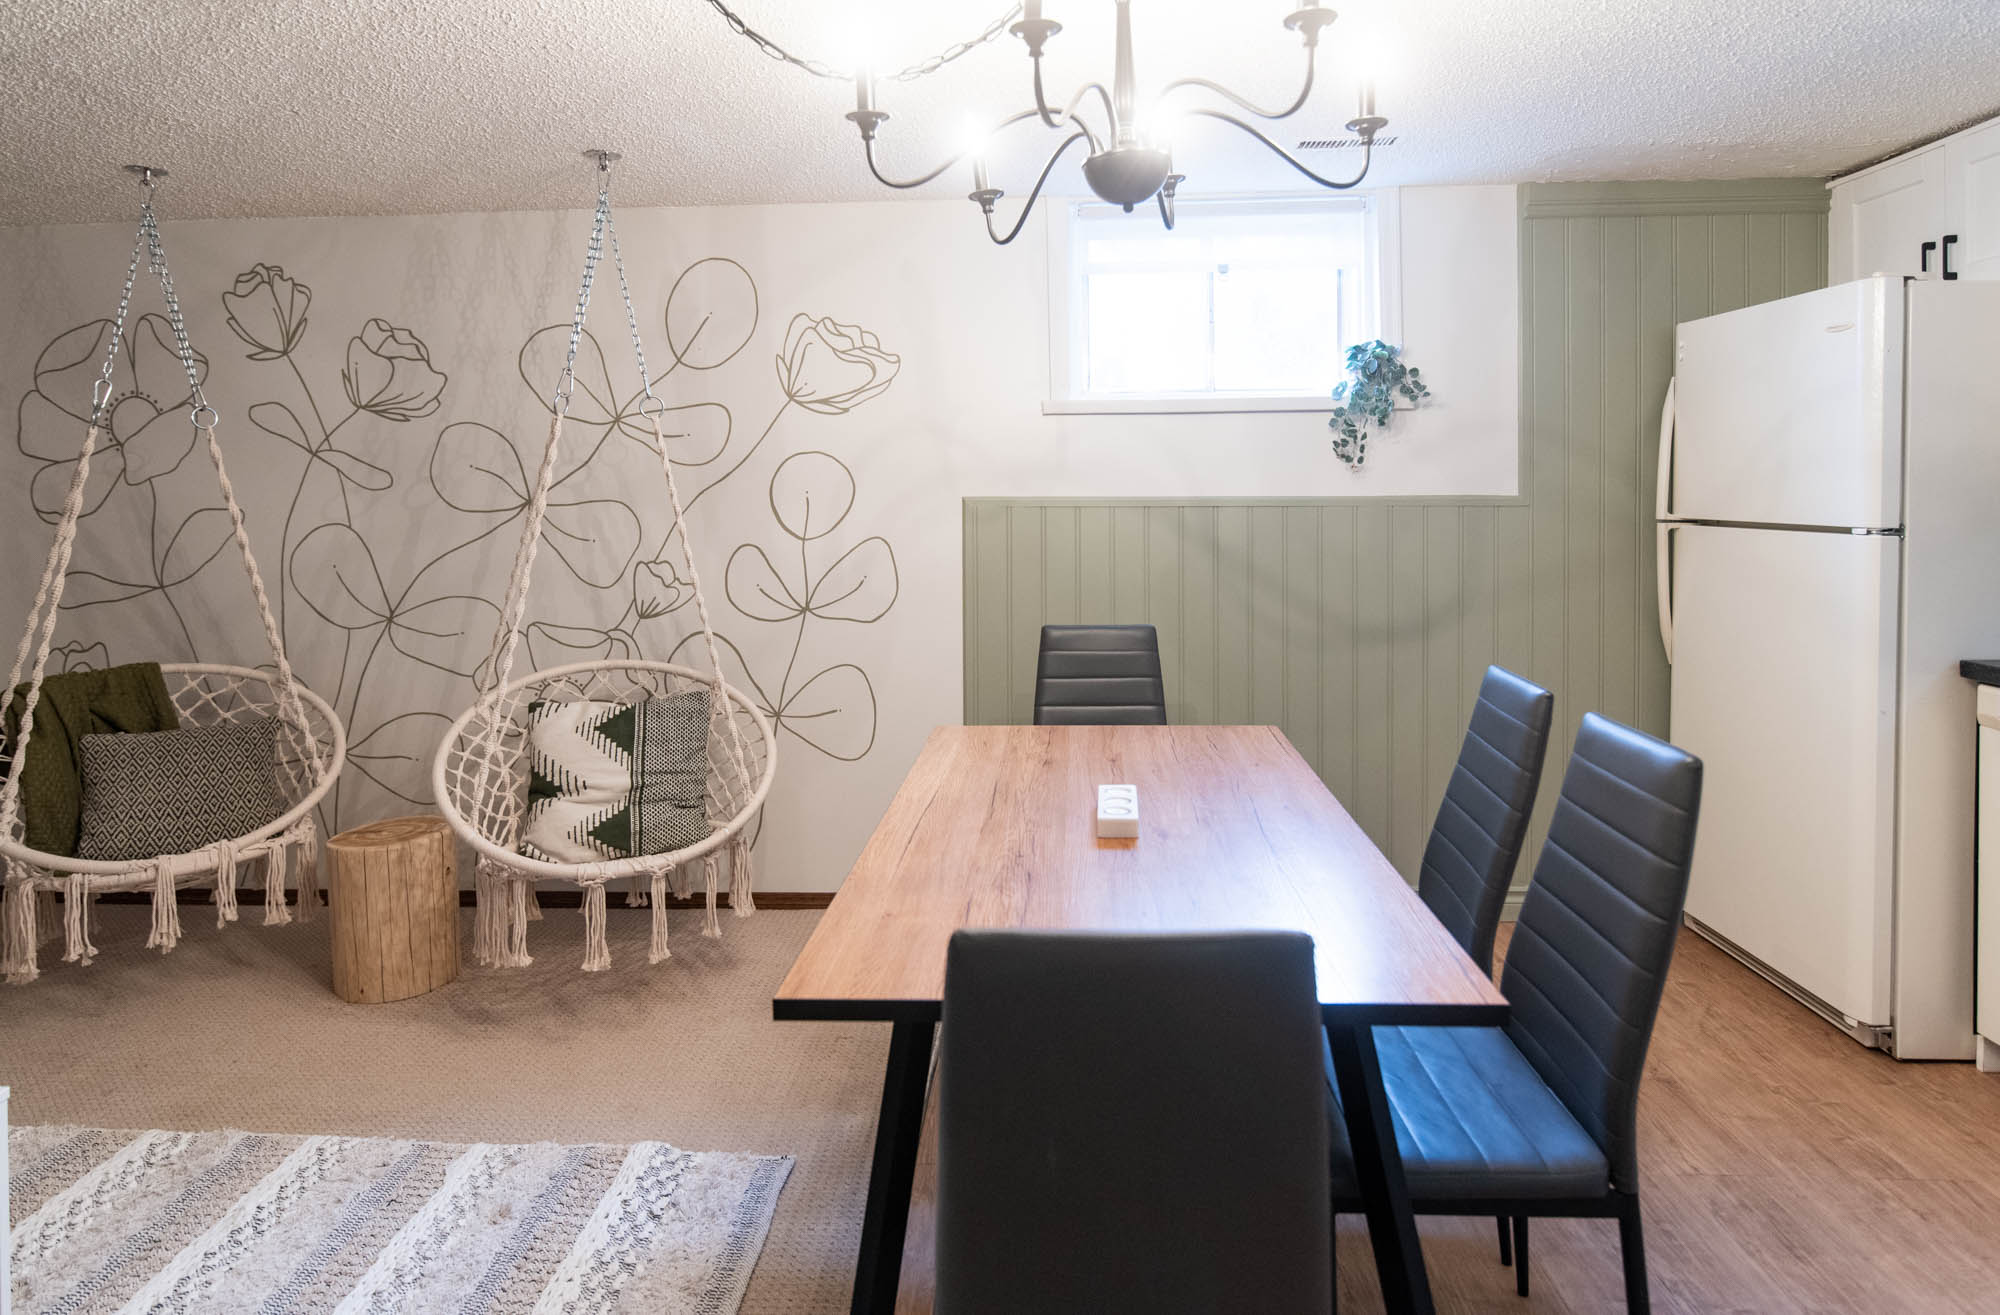 Playful basement suite AirBnB with farmhouse kitchen and hanging macrame chairs in front of a line art floral mural